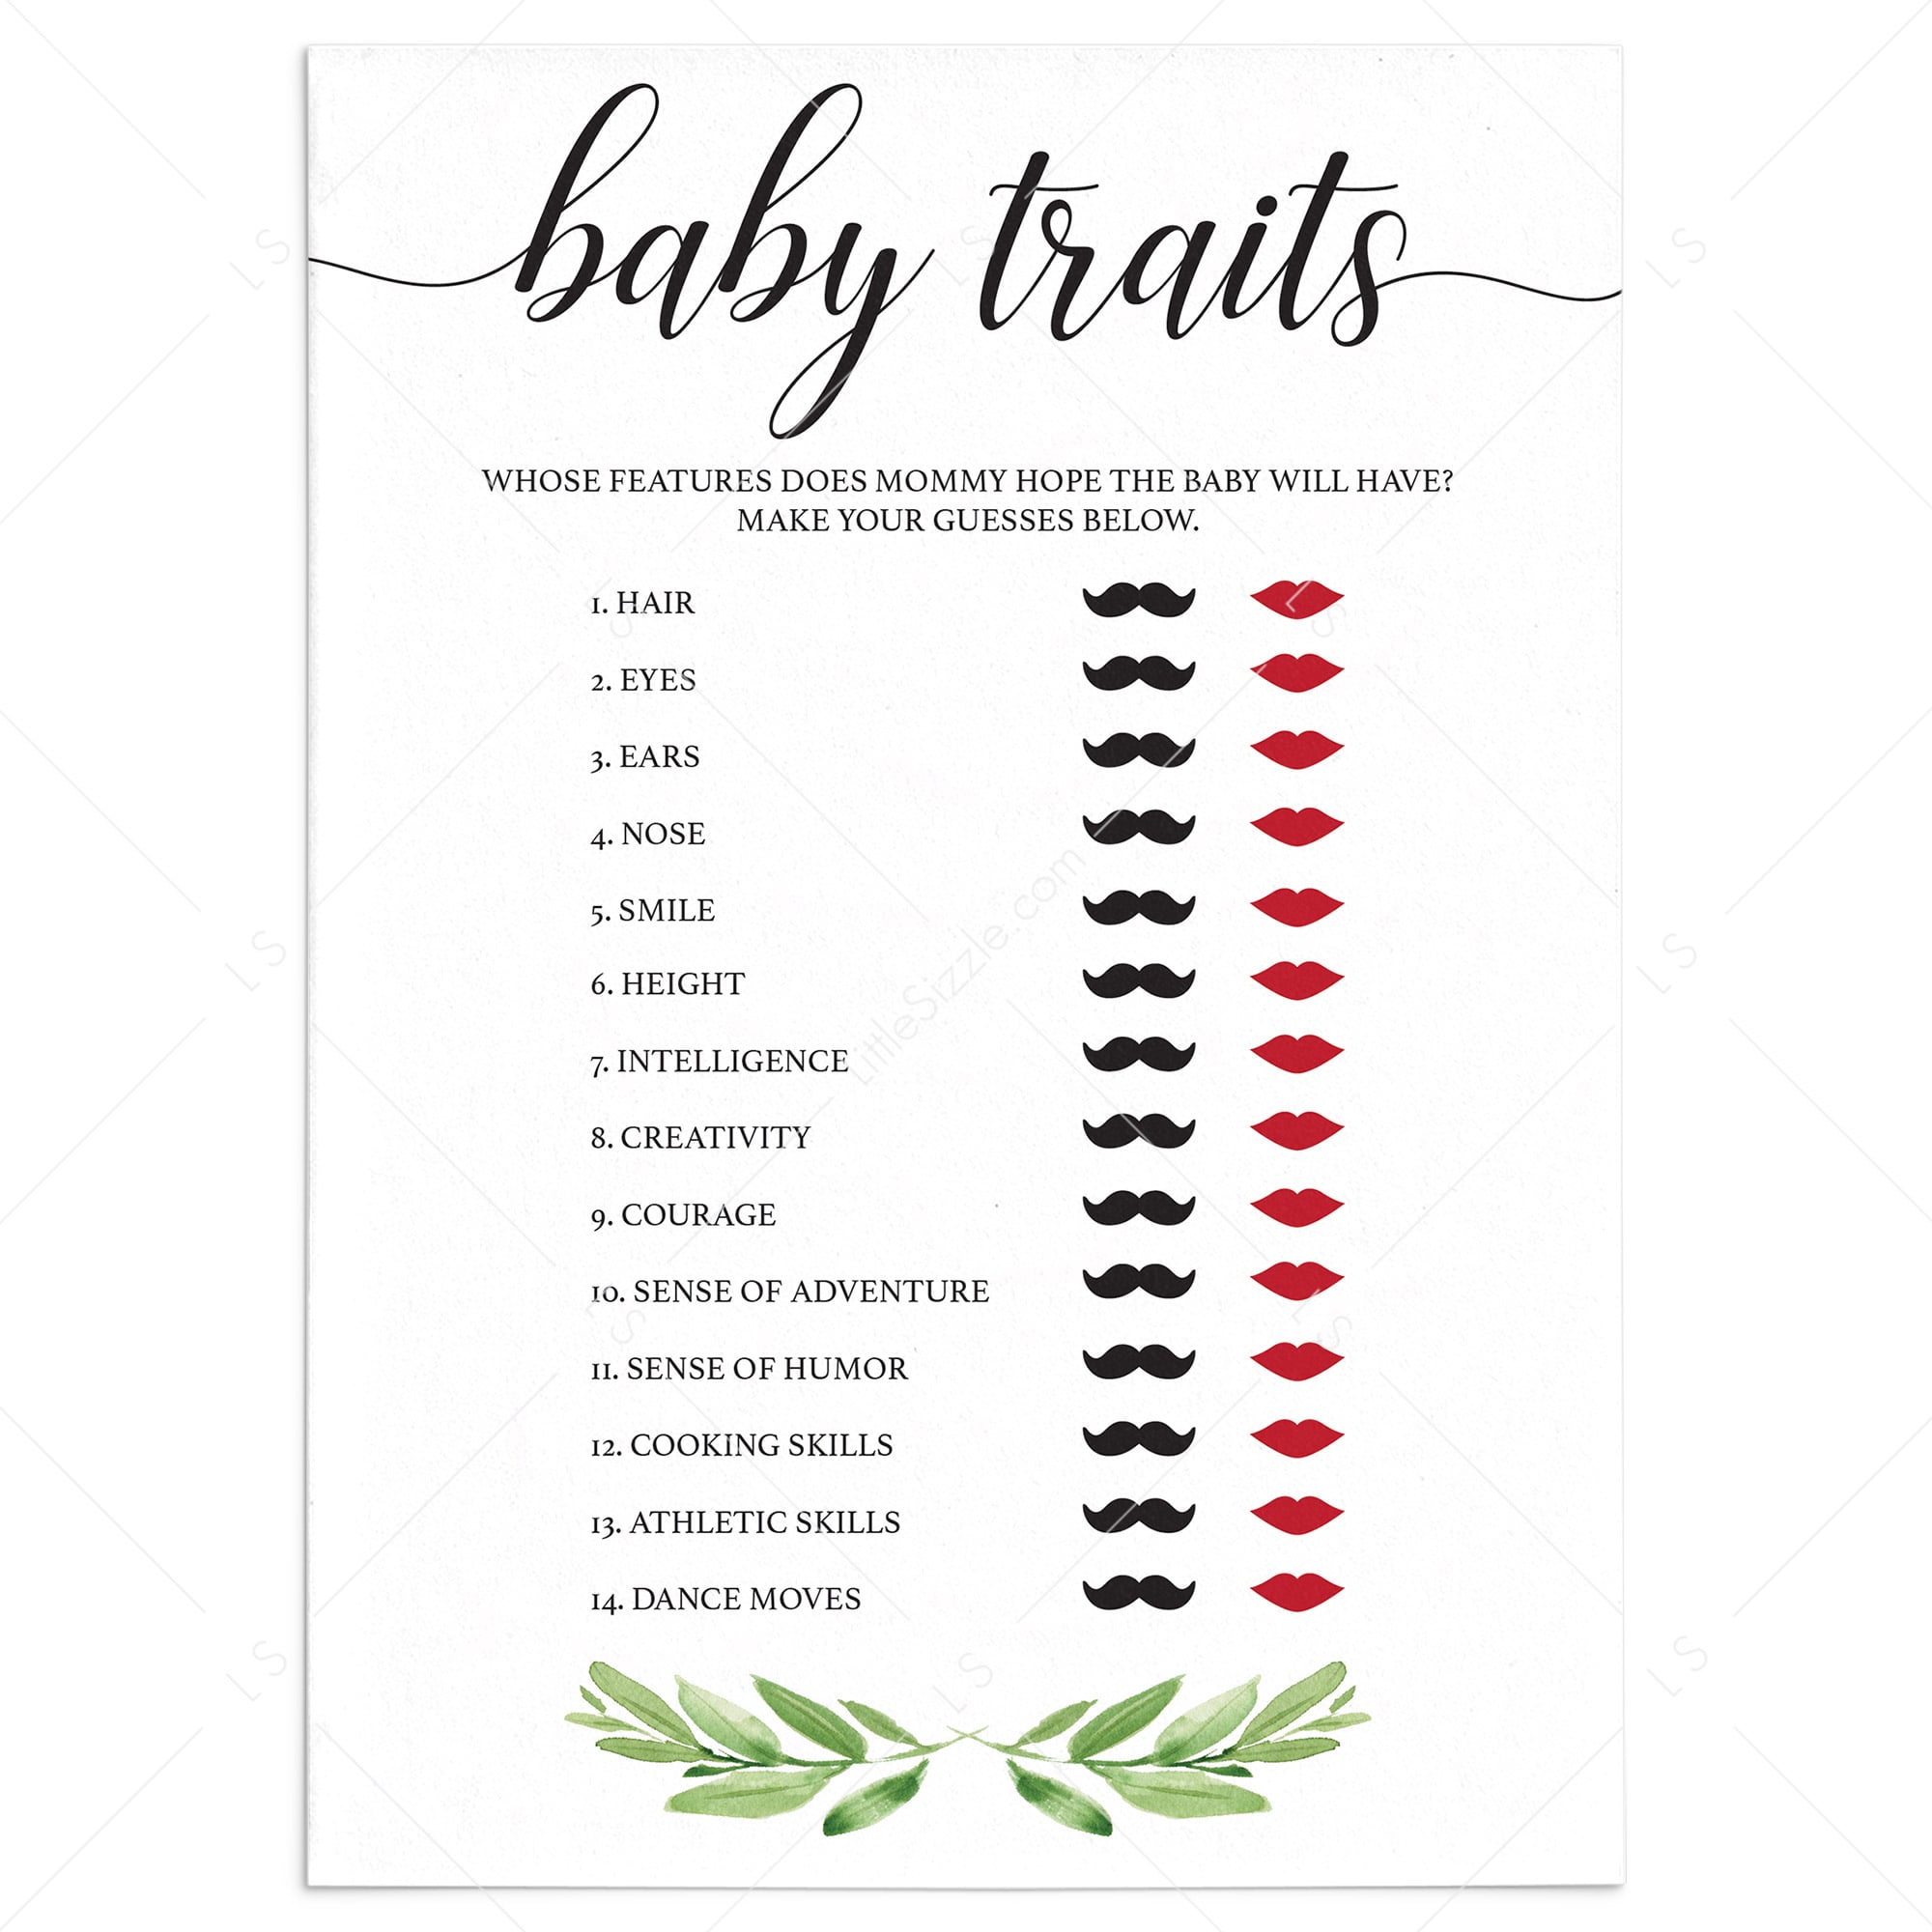 Printable baby shower games & virtual baby shower ideas